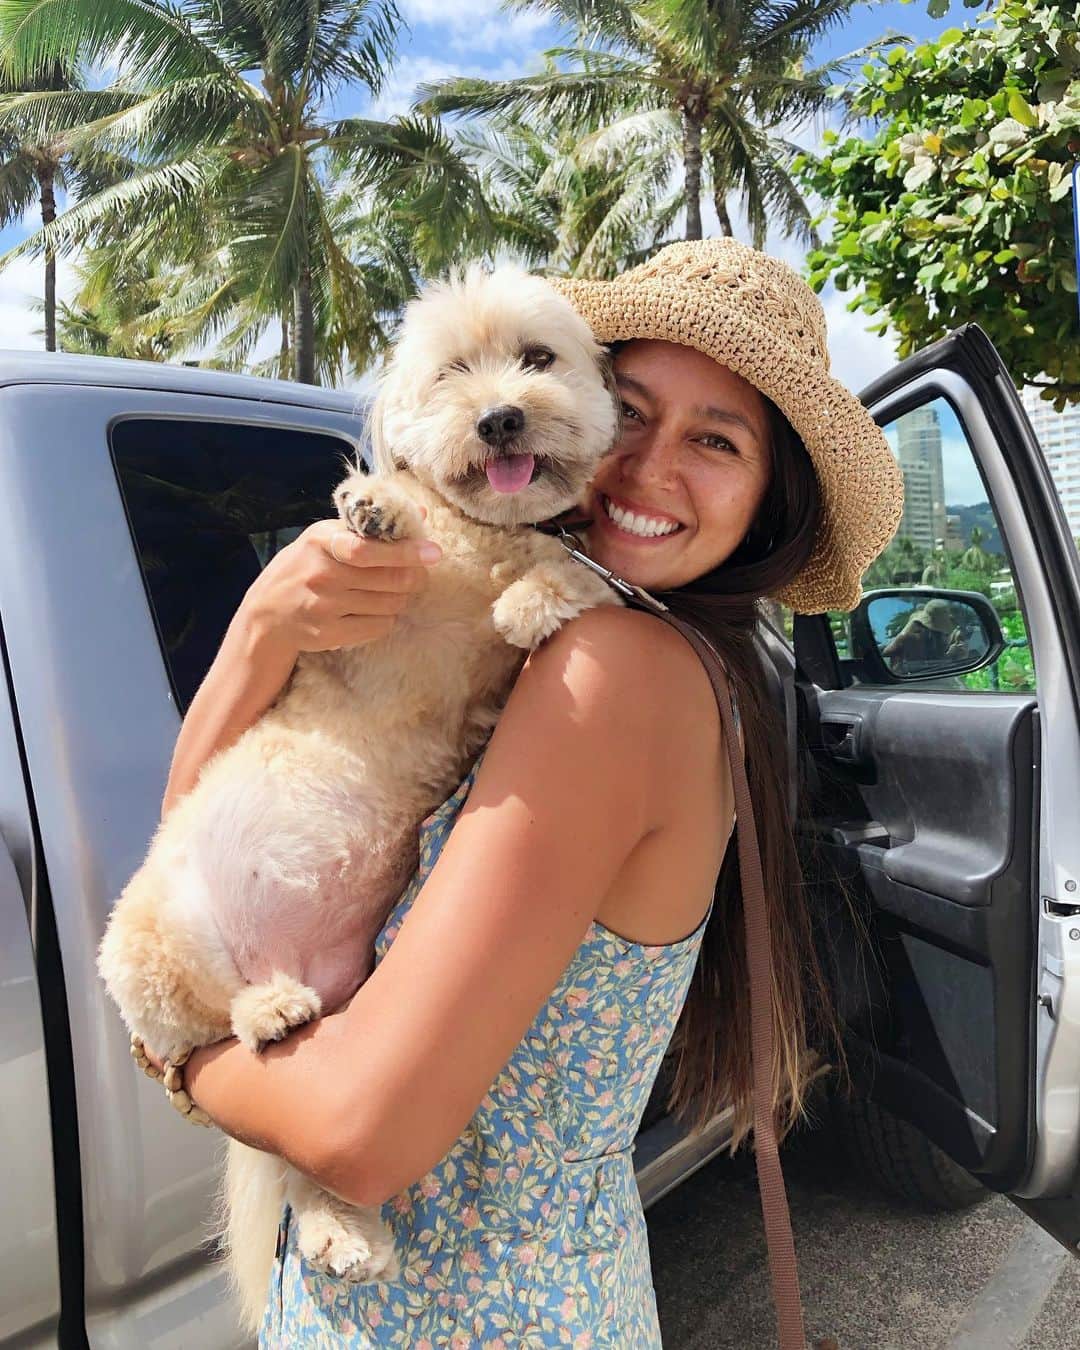 Tamikoのインスタグラム：「surprise town visit from my goddaughter angel pup @juzuhawaii and dear friend @mermaidlove808 🌴🐶 love you both so much!」